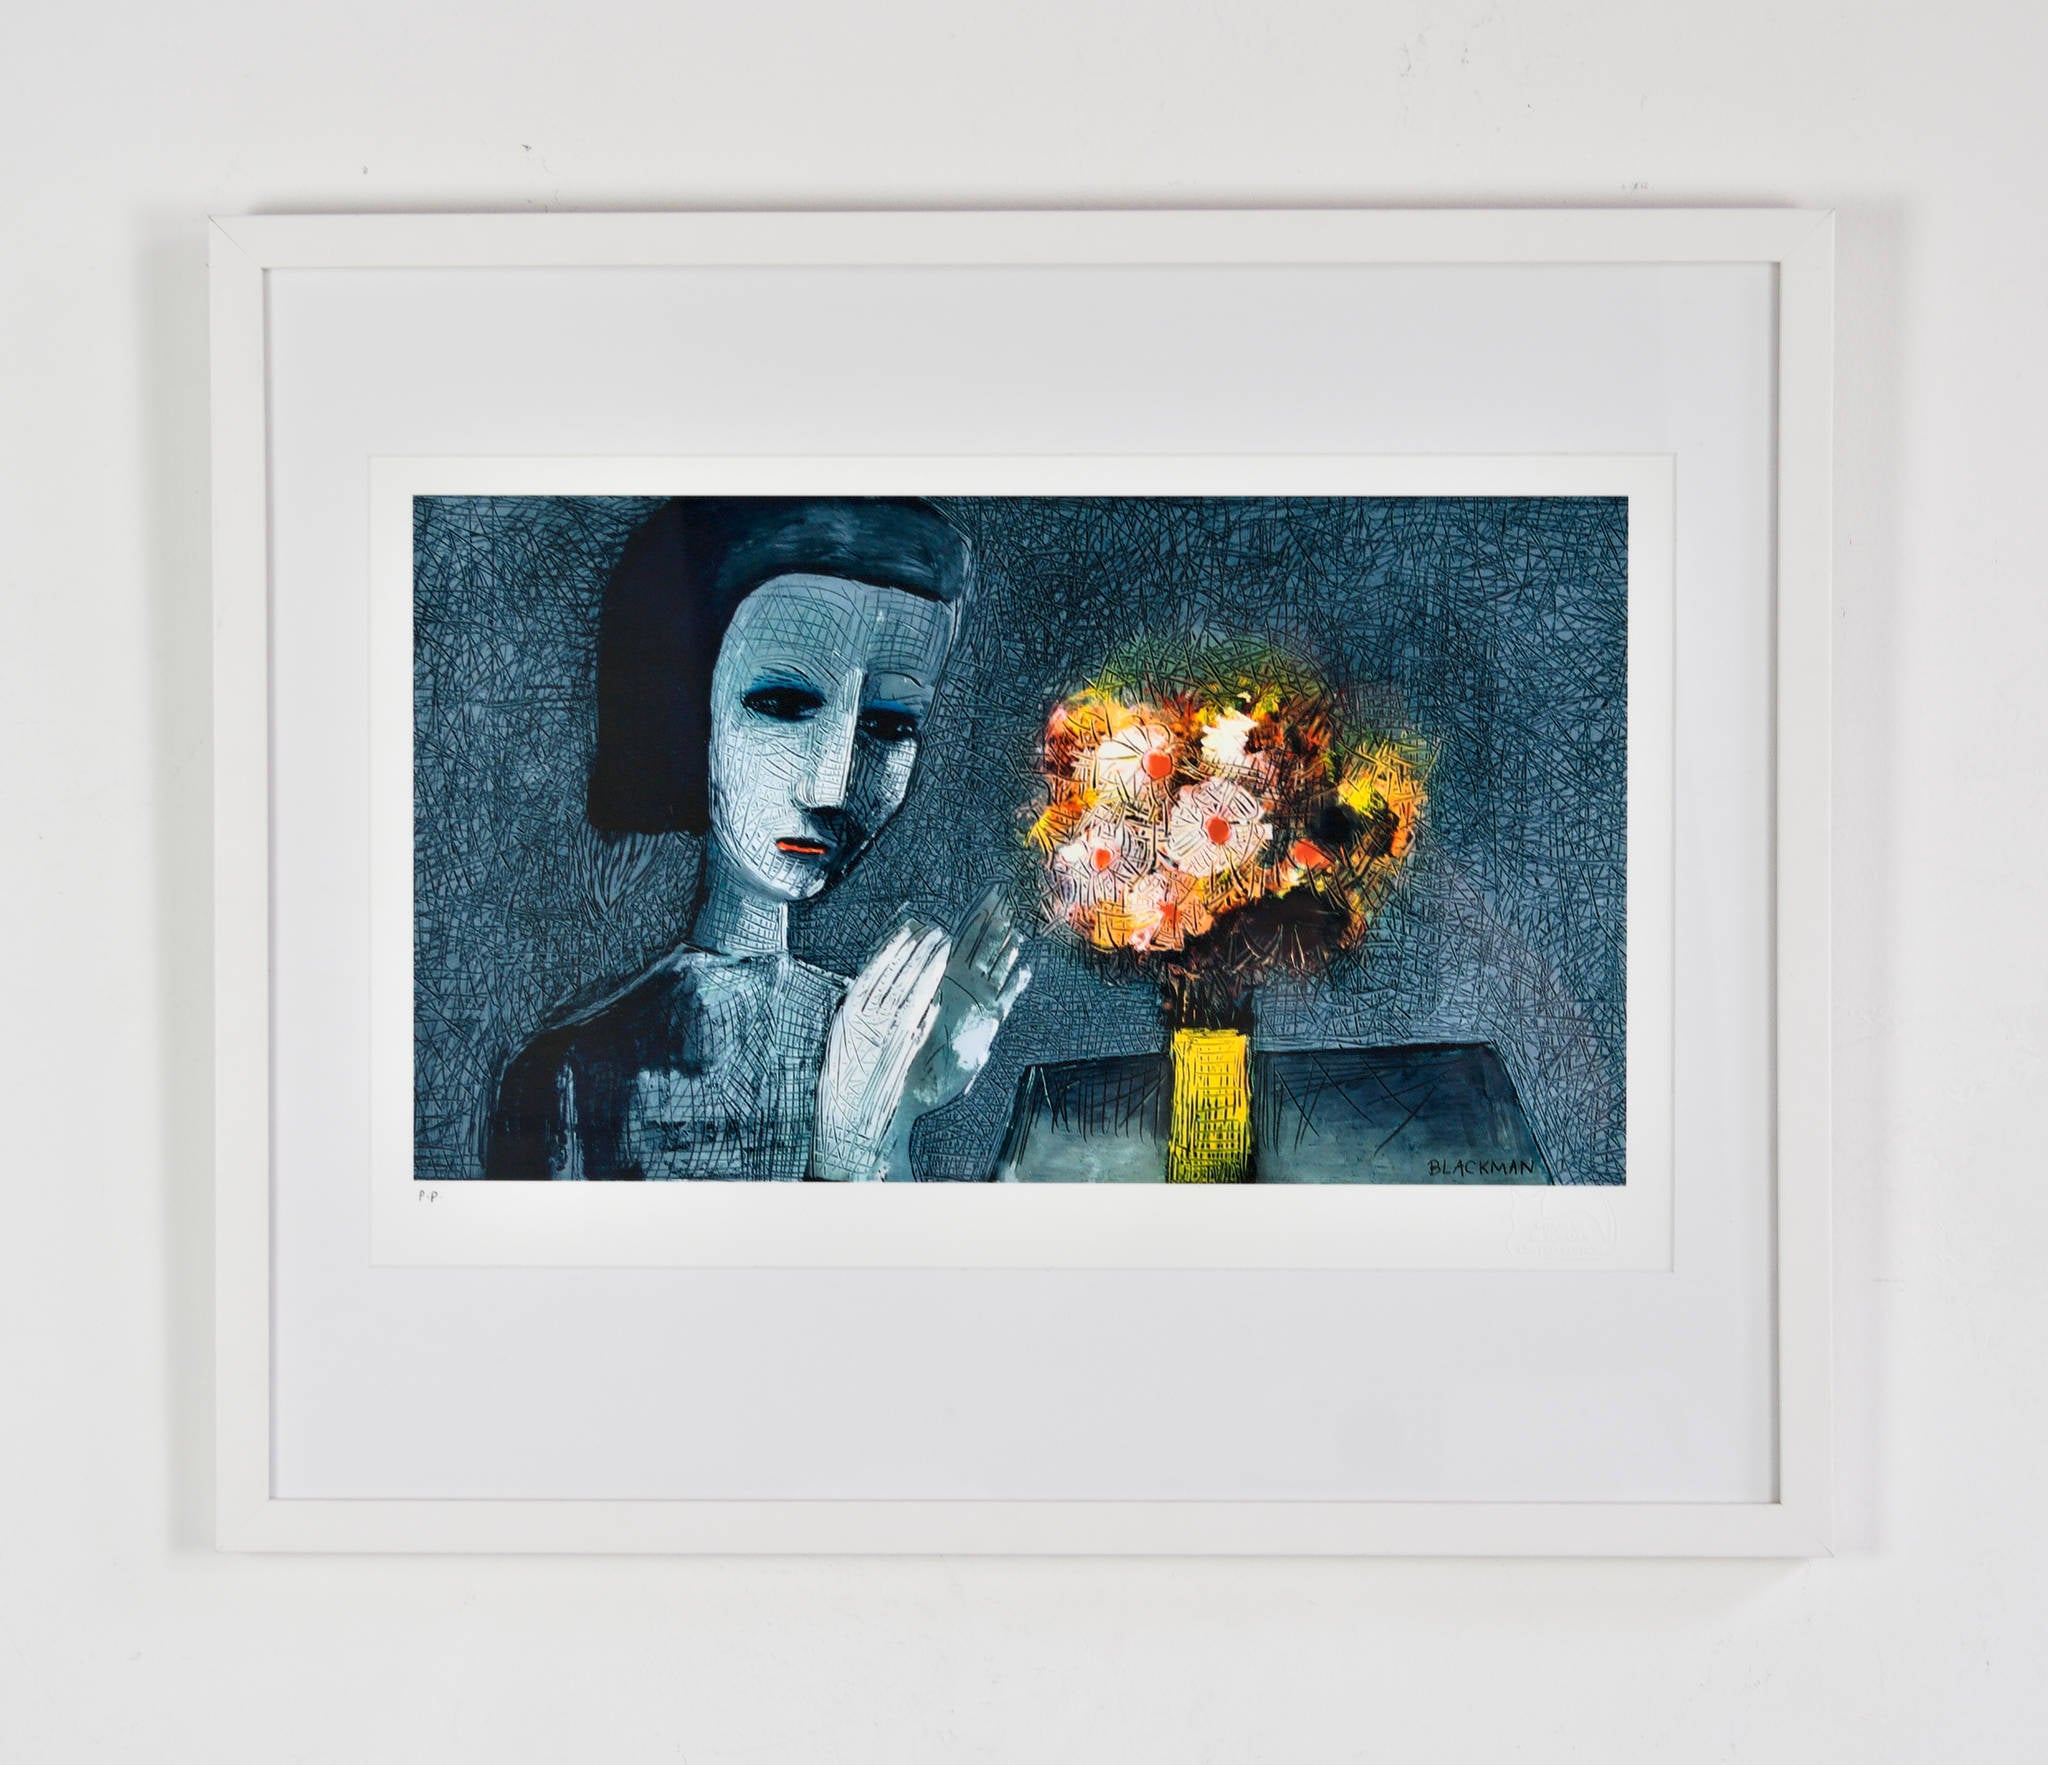 Charles Blackman 'Girl with Flowers'